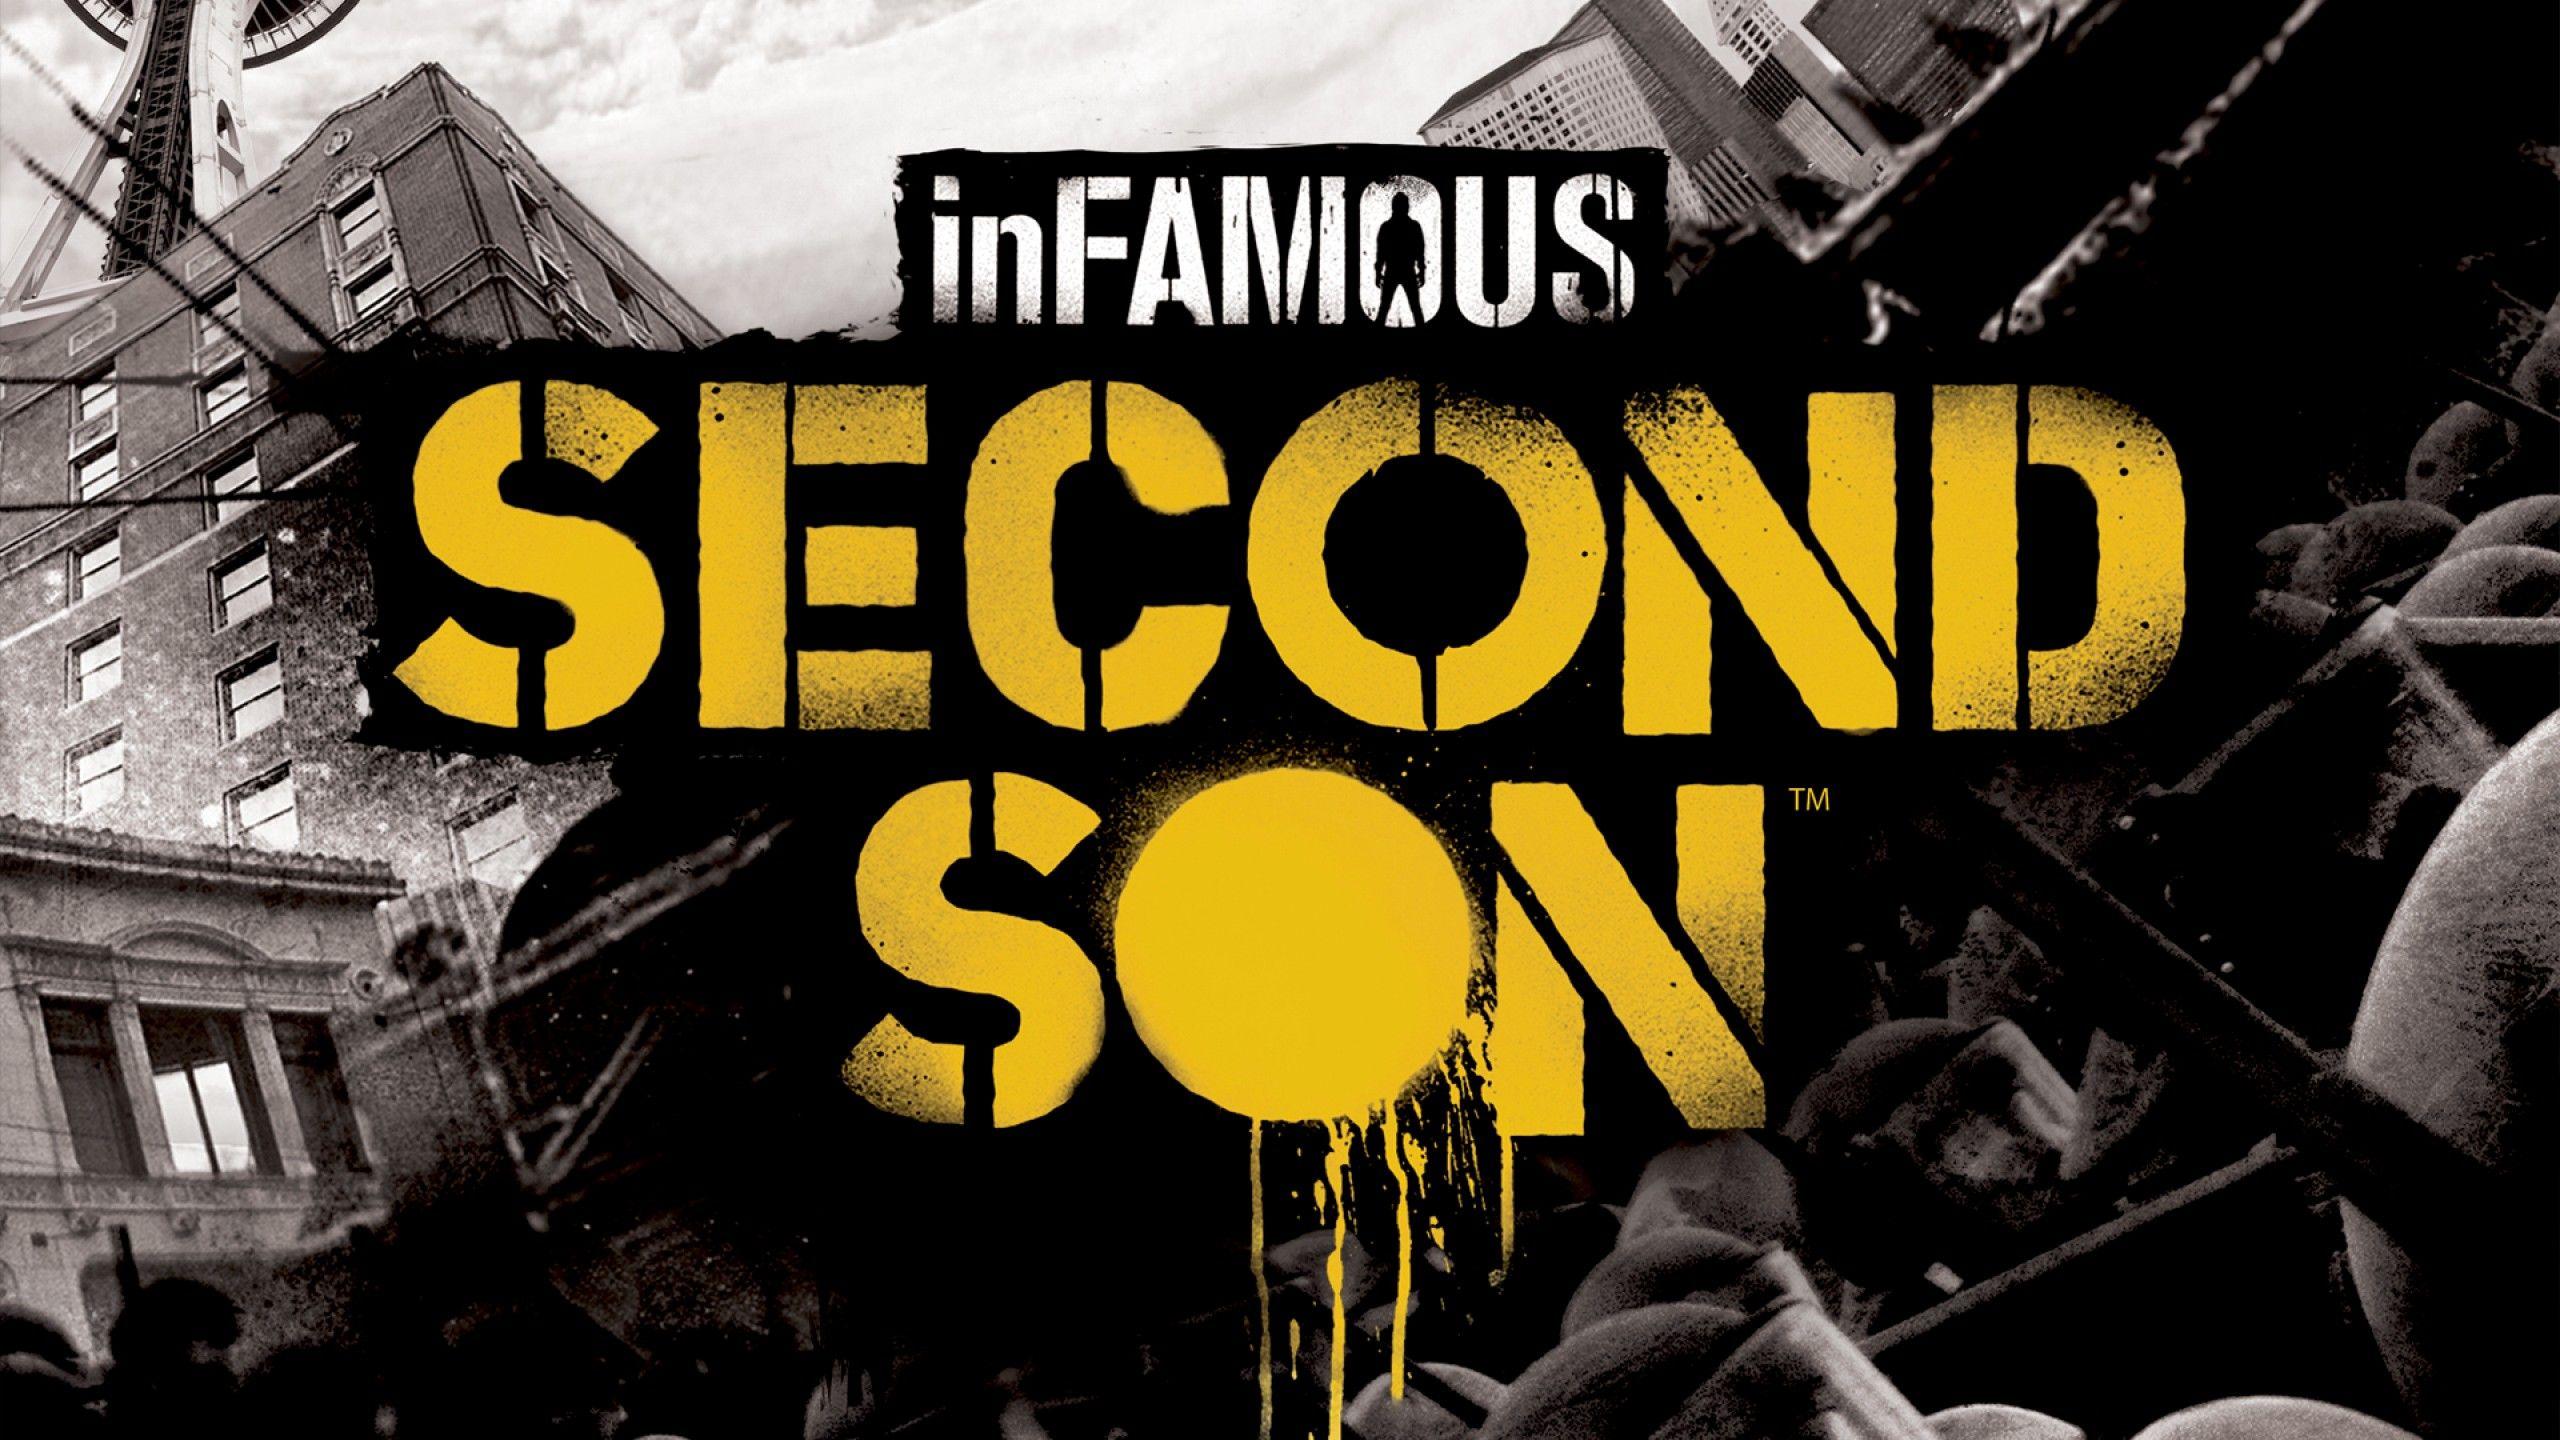 Infamous Second Son Logo Background